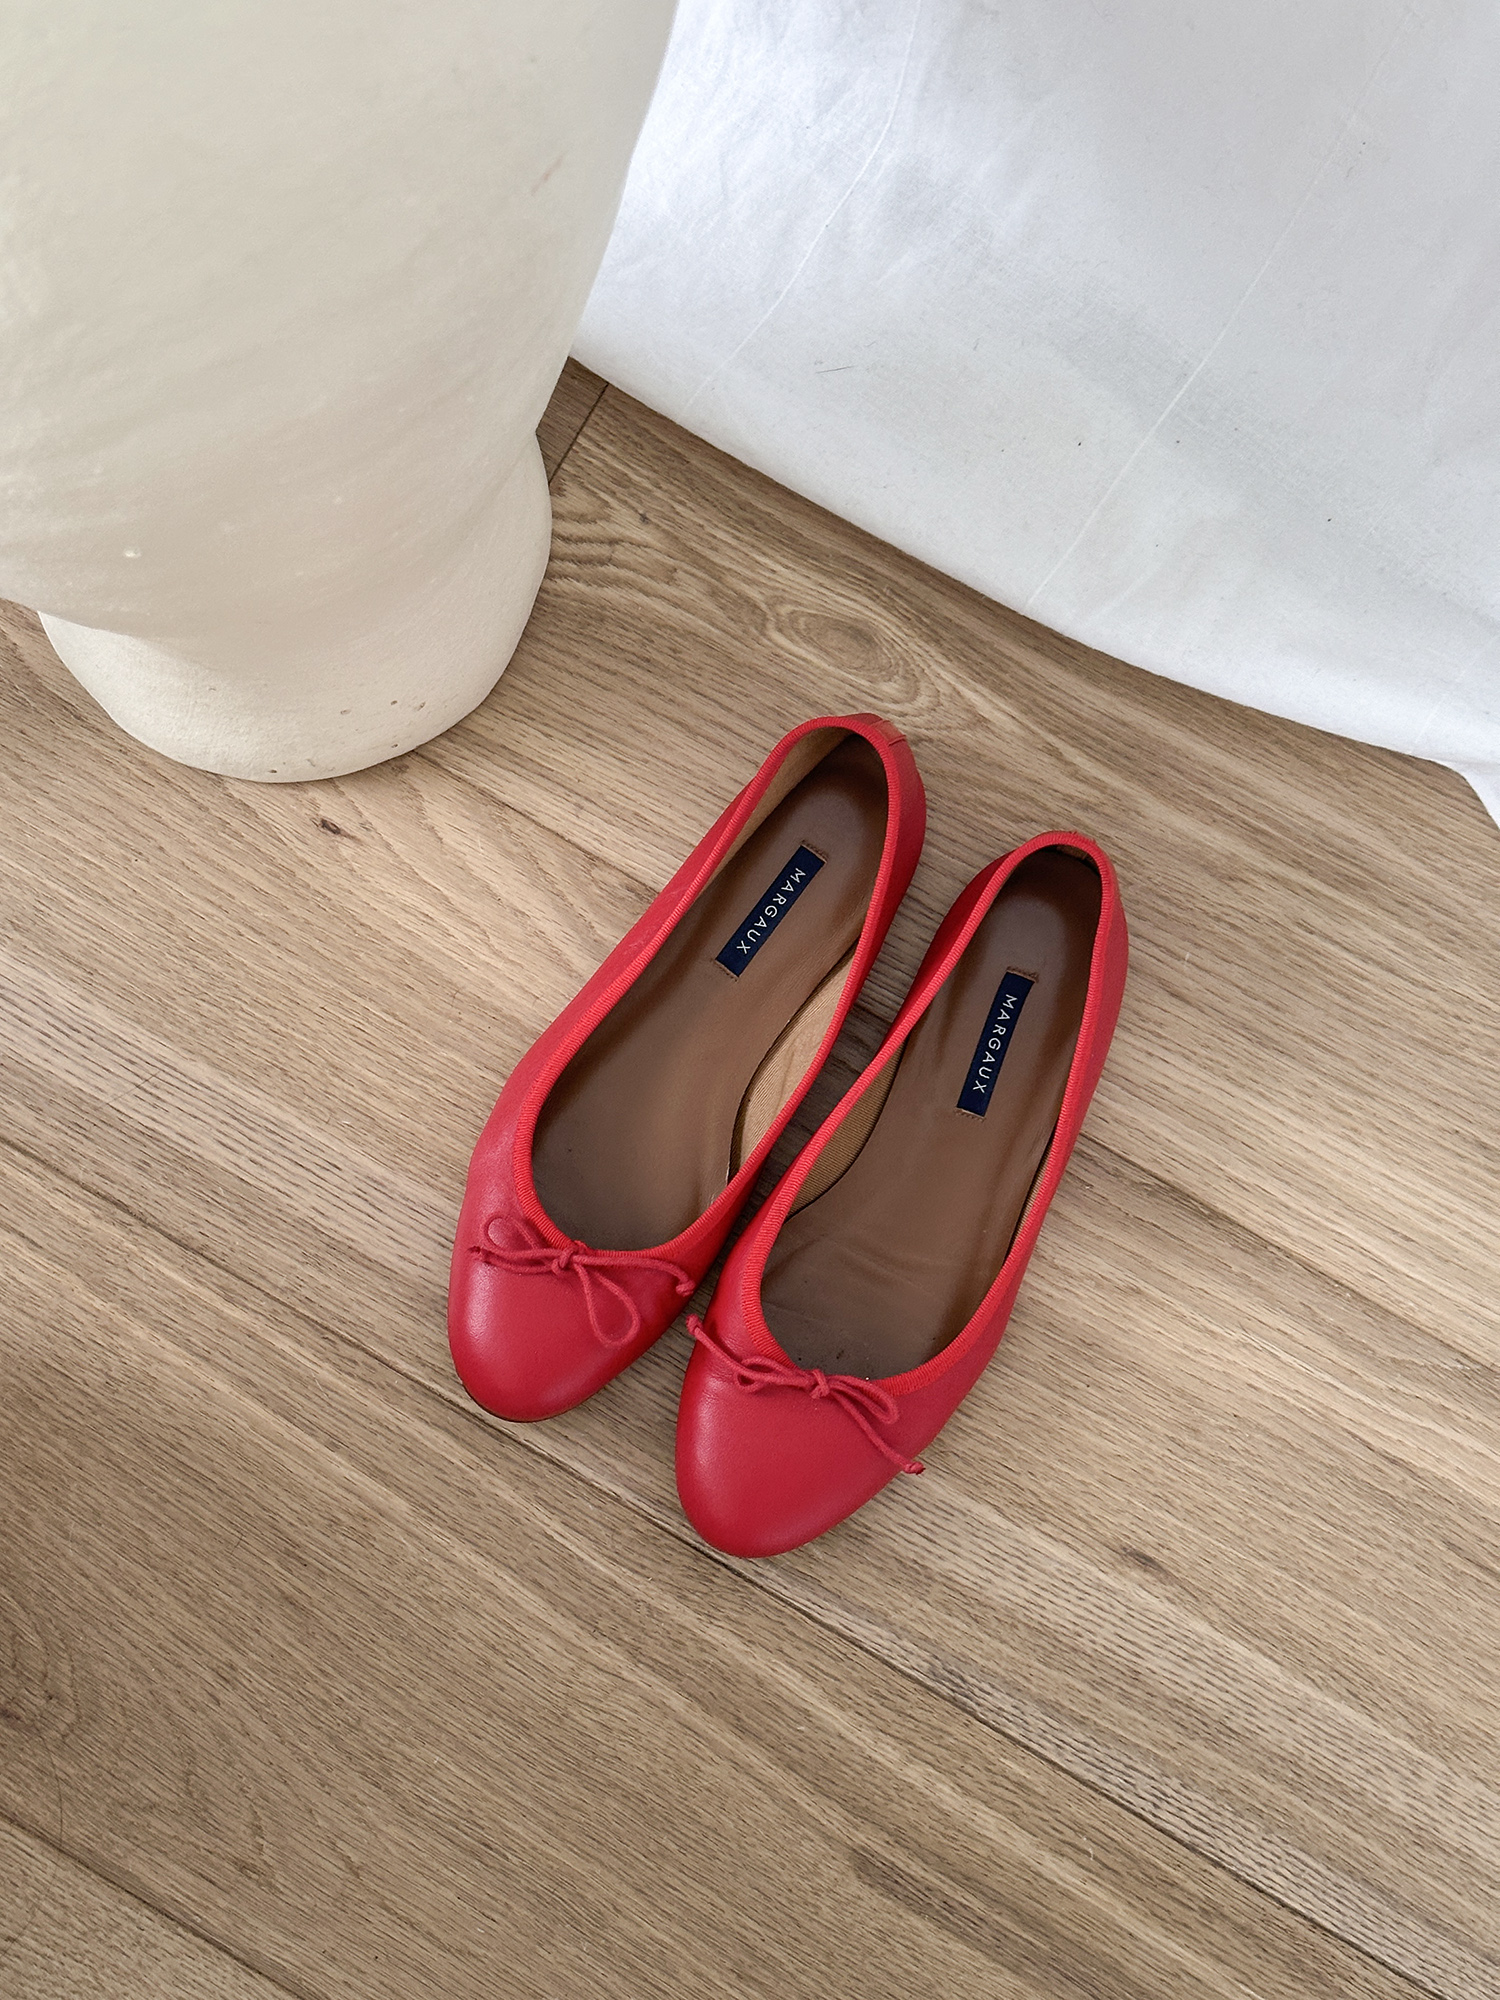 Three ways to style red ballet flats for classic dressing